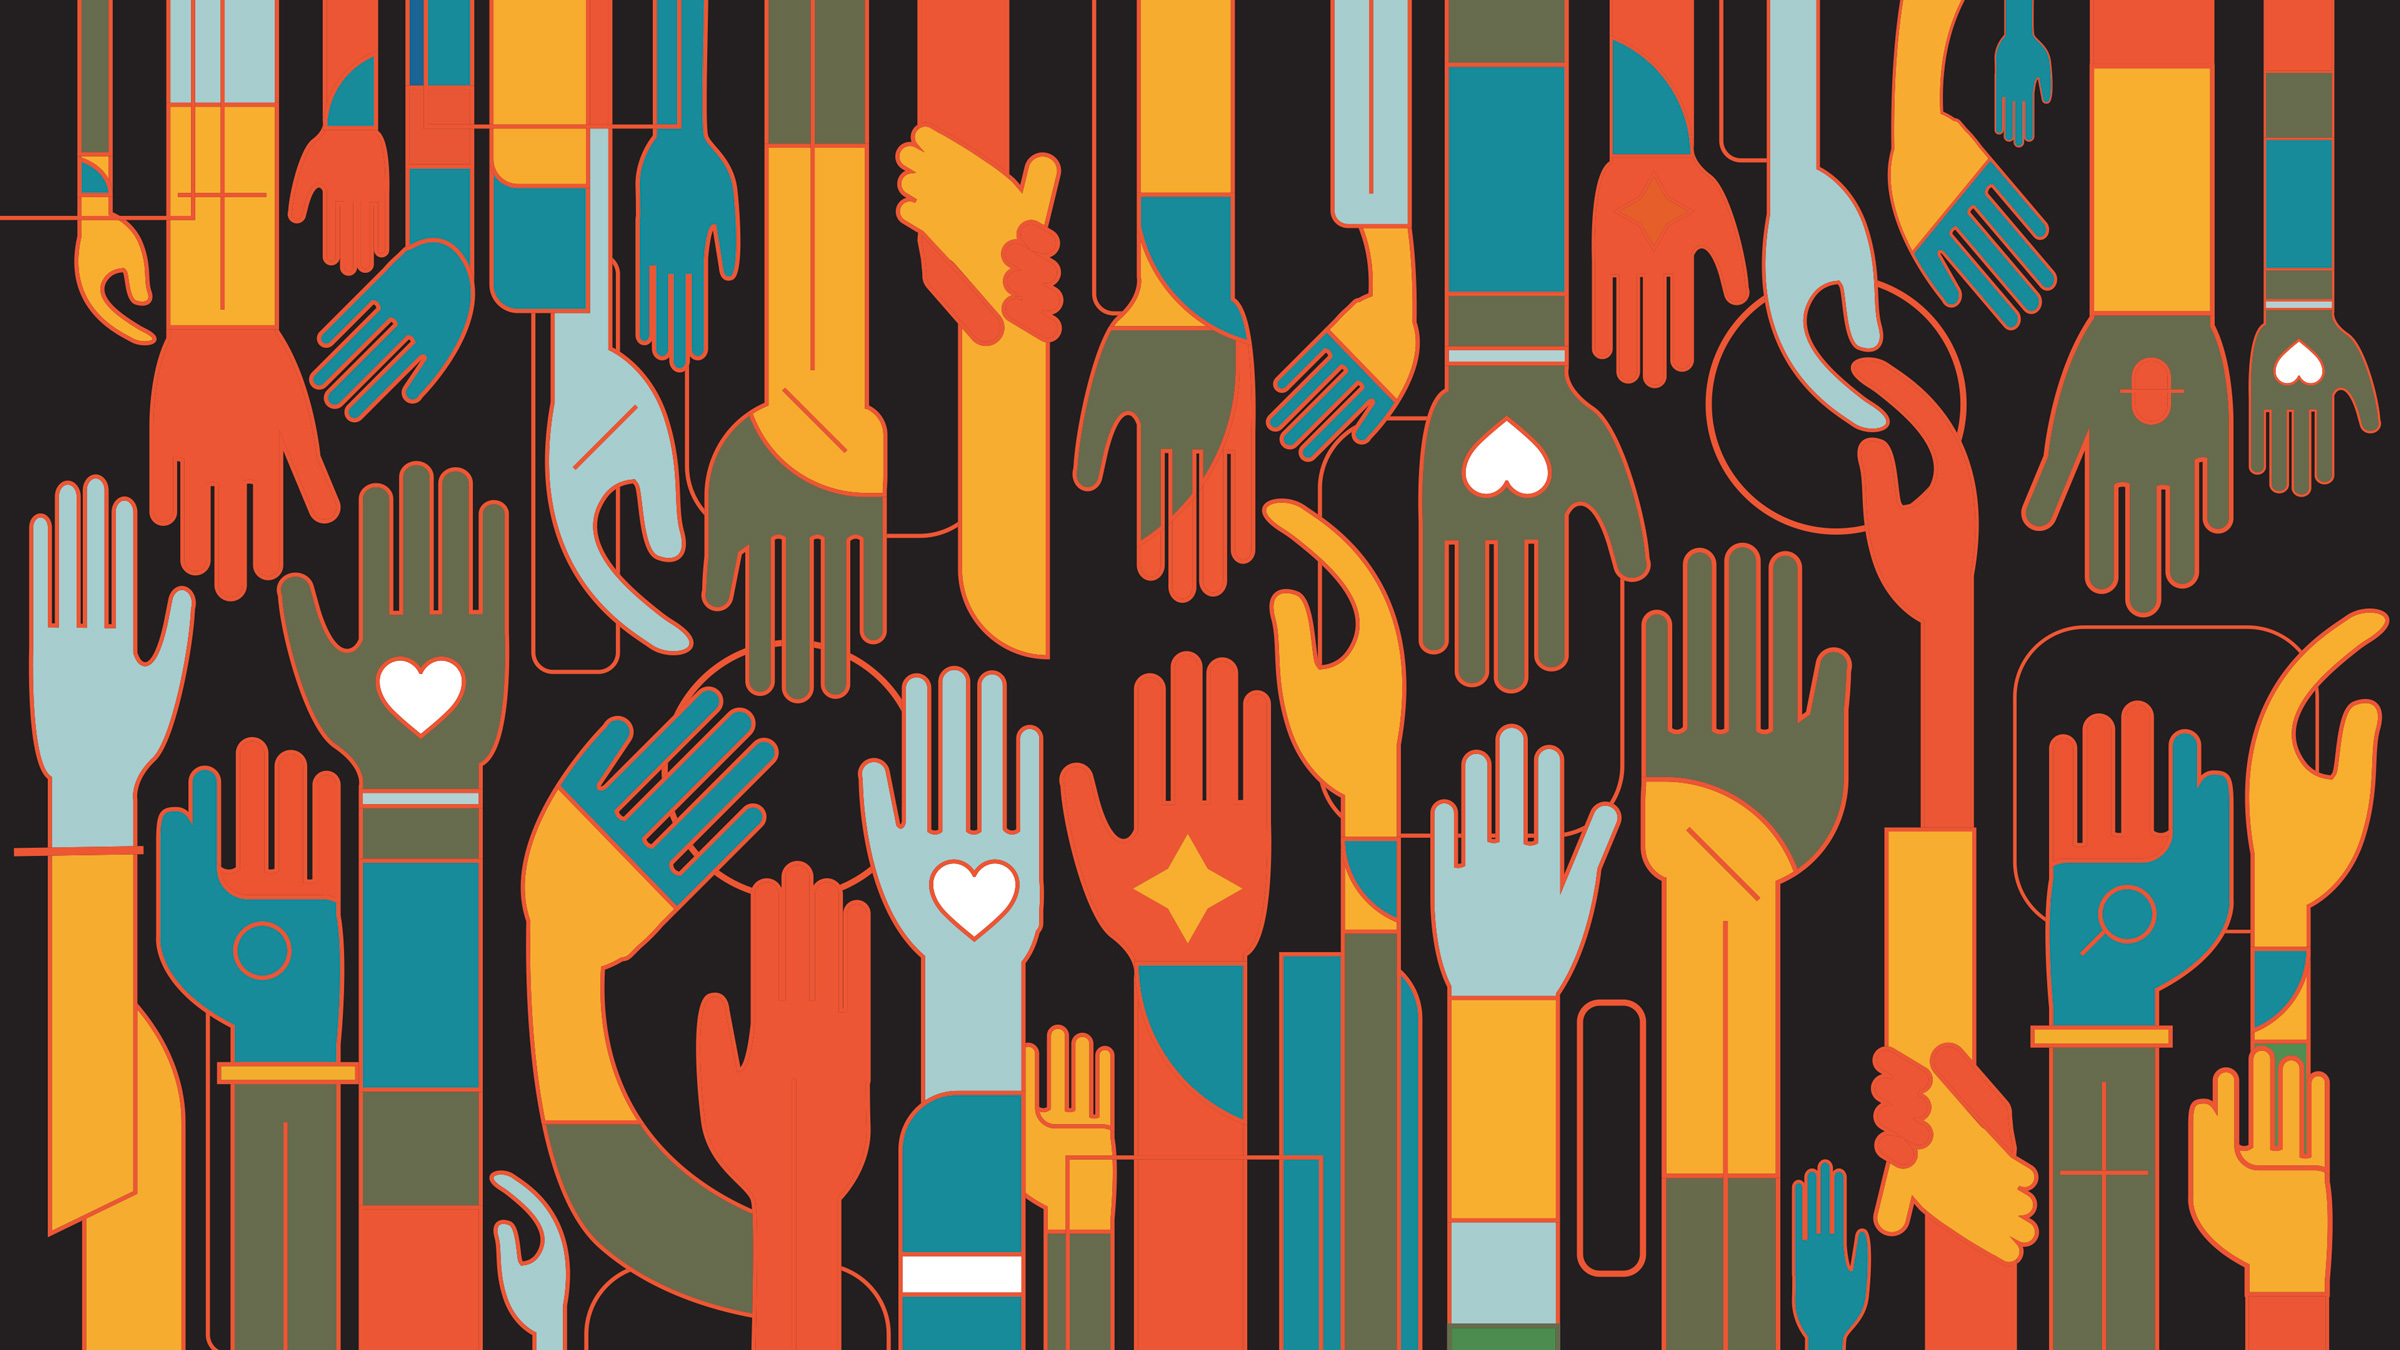 two rows of hands reaching towards each other, illustration